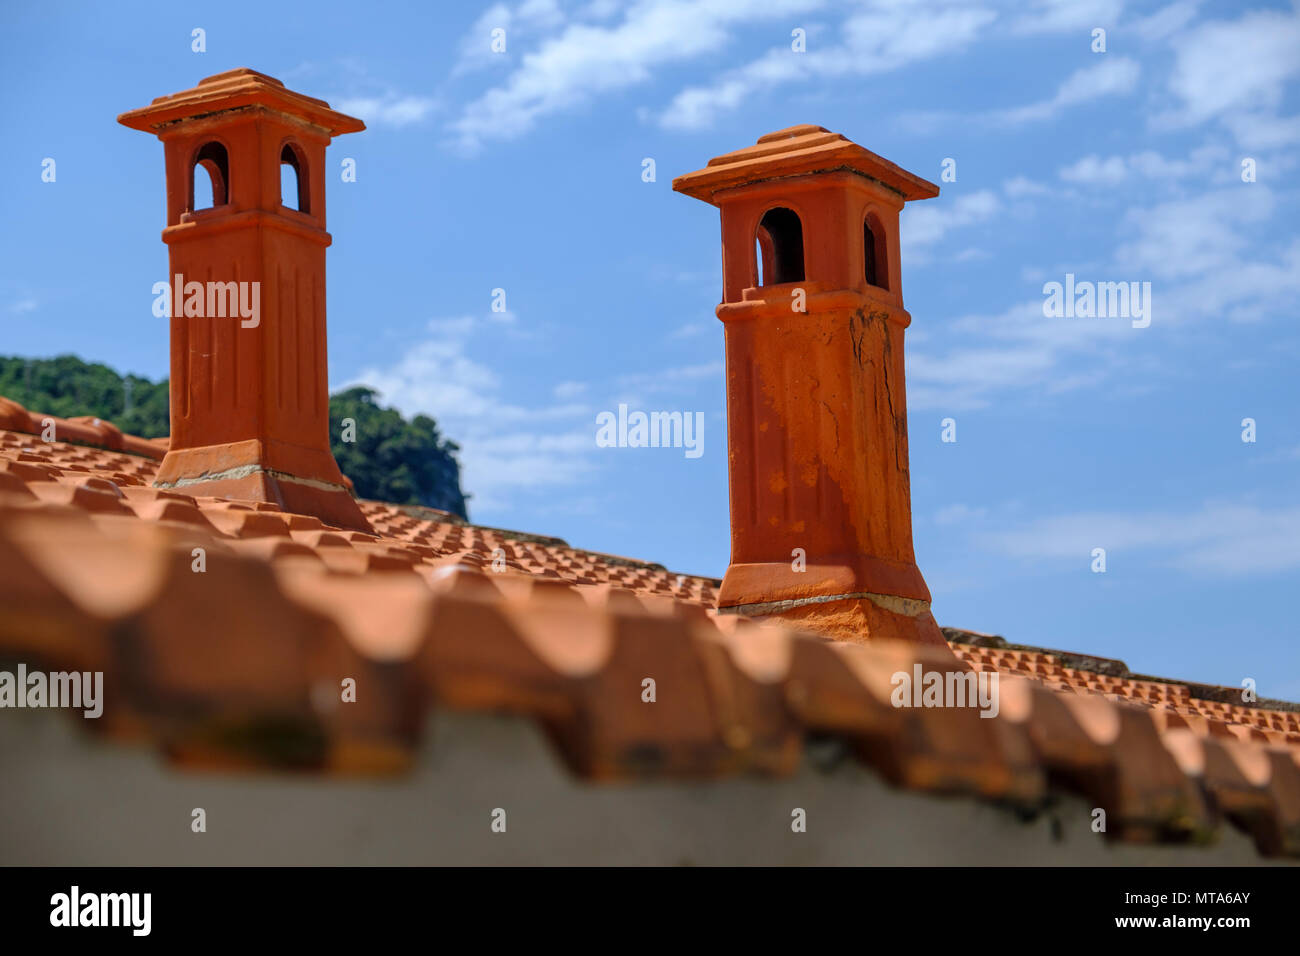 Beautiful red terracotta chimneys on a tiled rooftop in Portovenere Italy against blue sky Stock Photo